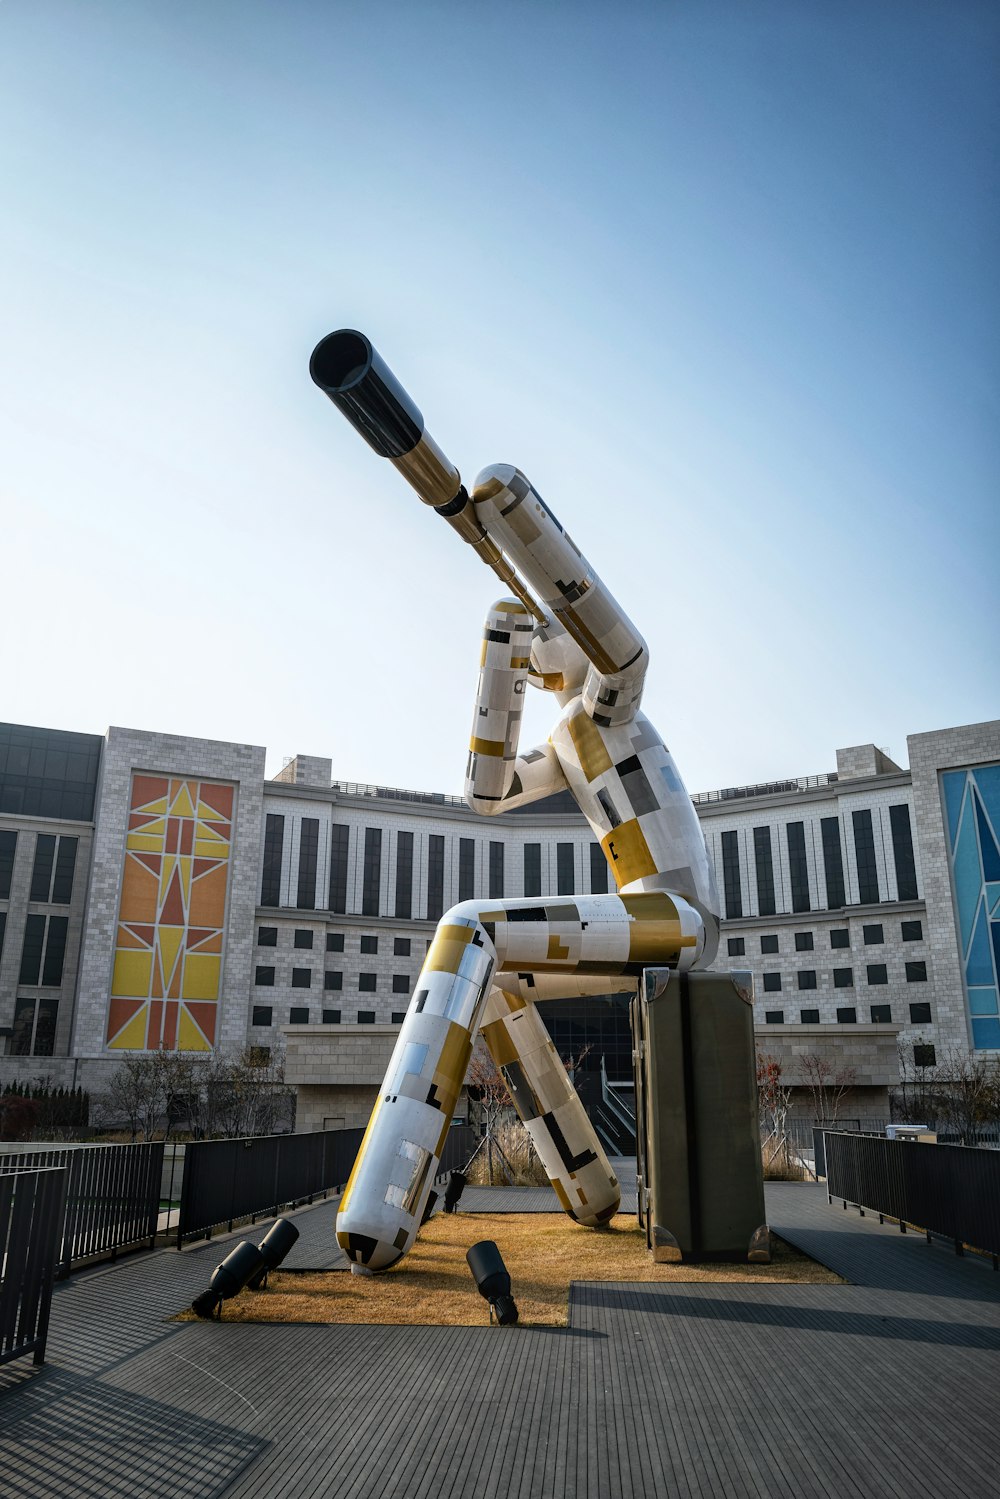 white and black telescope near white concrete building during daytime